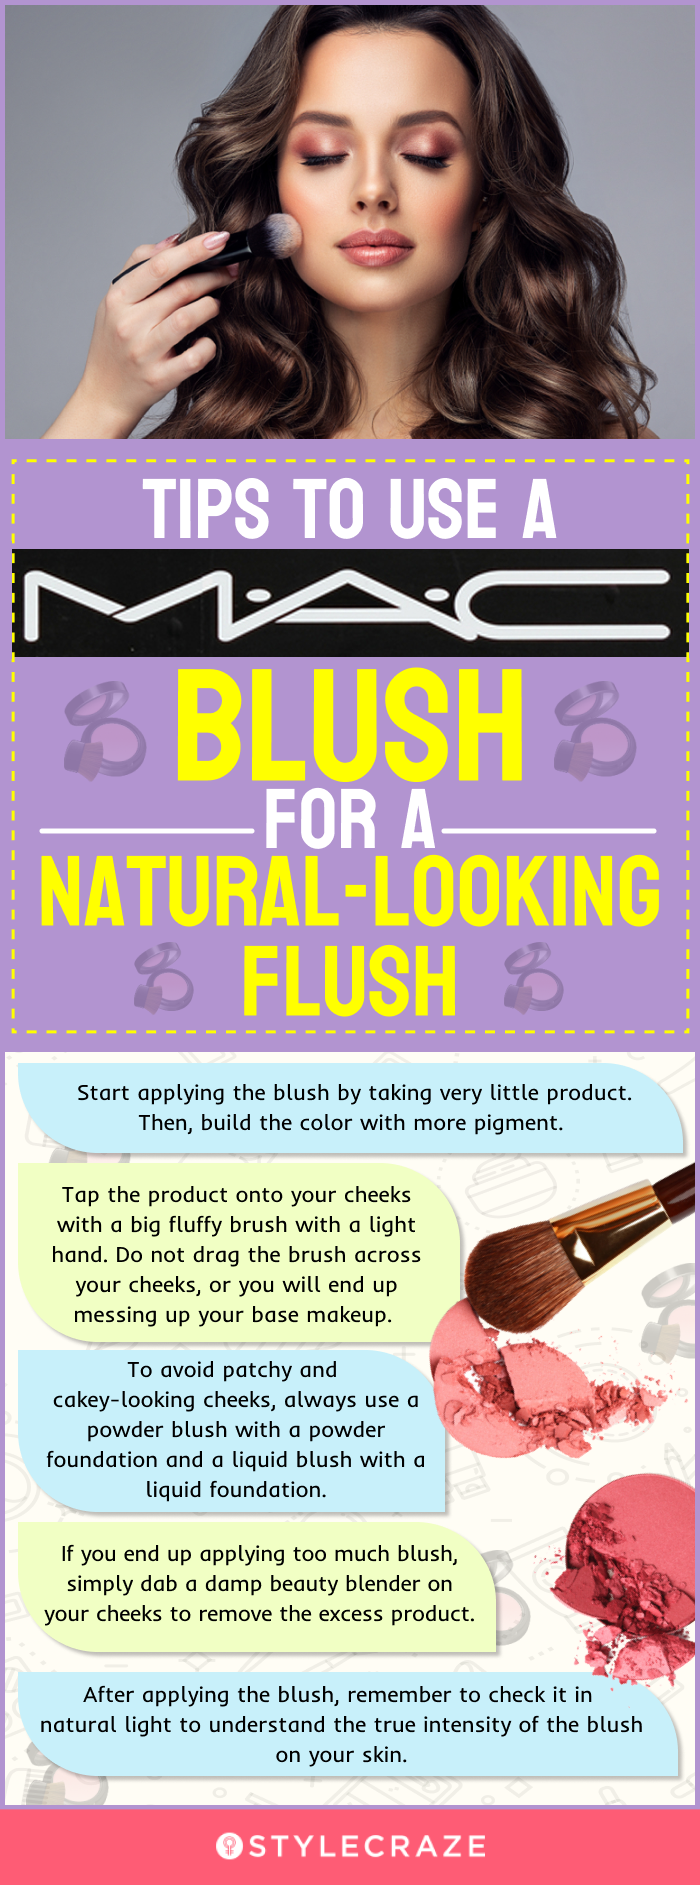 Tips To Use A MAC Blush For A Natural-Looking Flush (infographic)